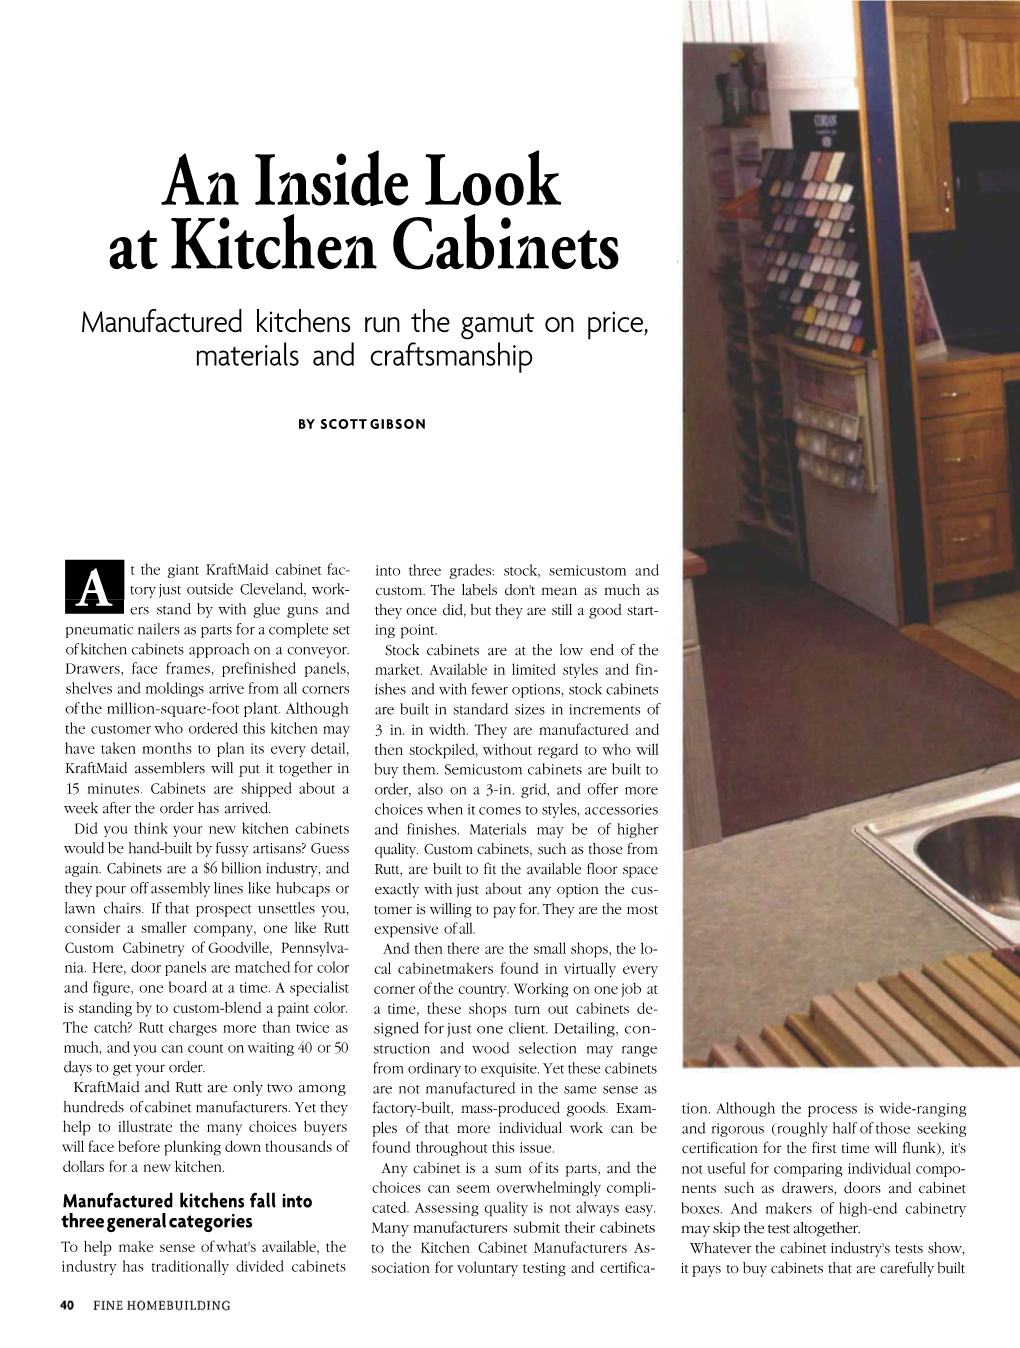 An Inside Look at Kitchen Cabinets Manufactured Kitchens Run the Gamut on Price, Materials and Craftsmanship